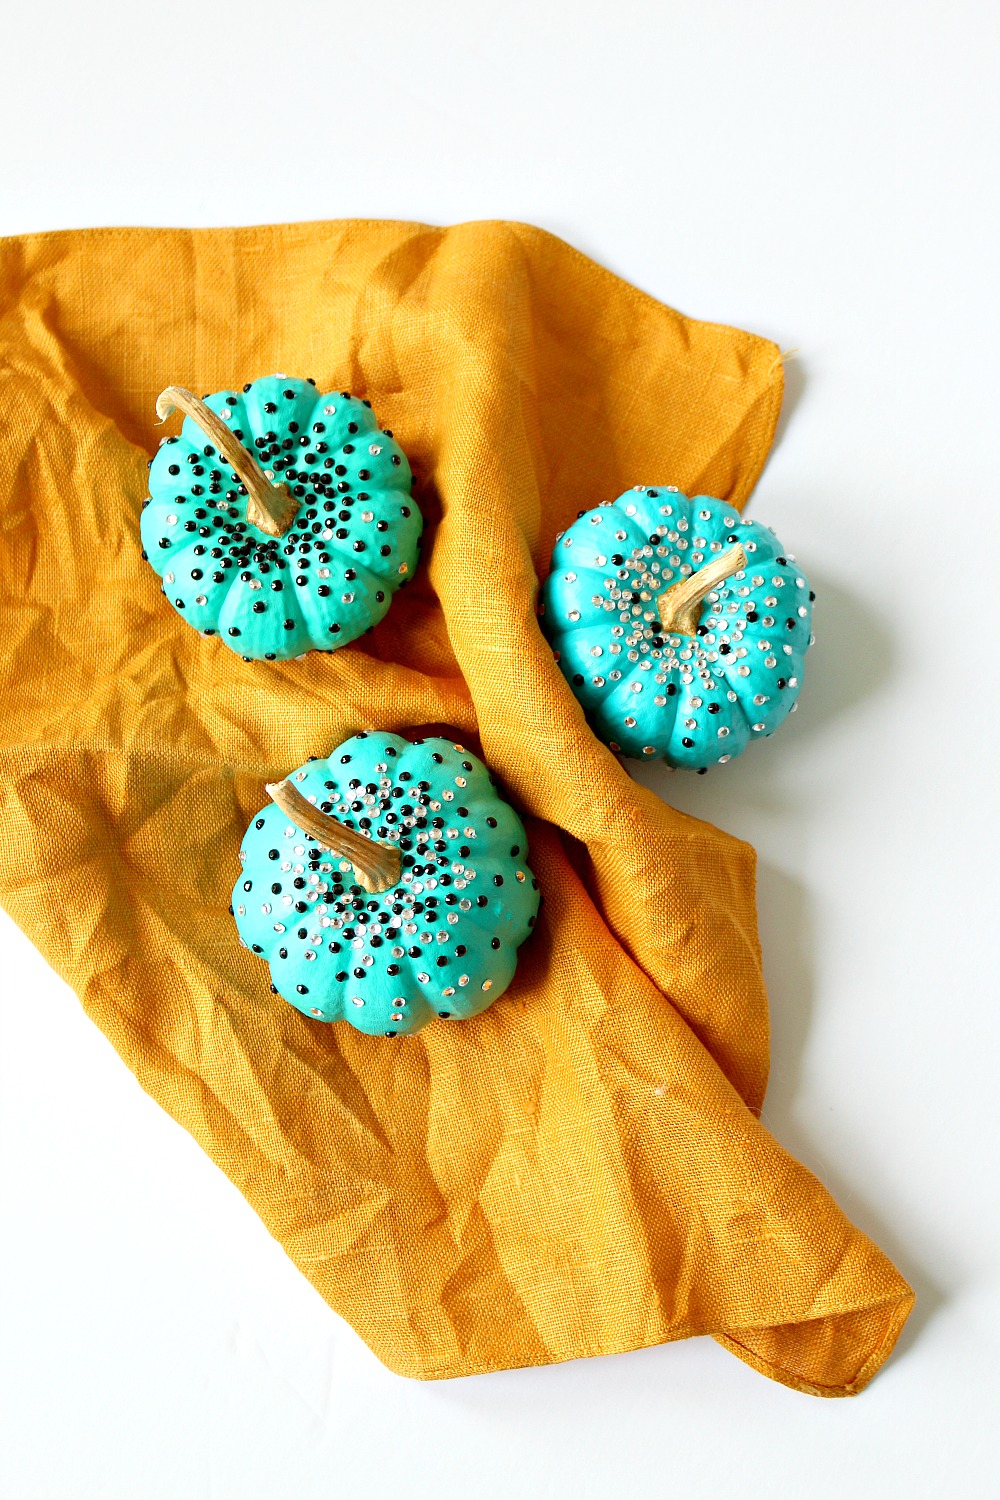 Turquoise DIY No Carve Pumpkins with Black and White Rhinestone Sparkles